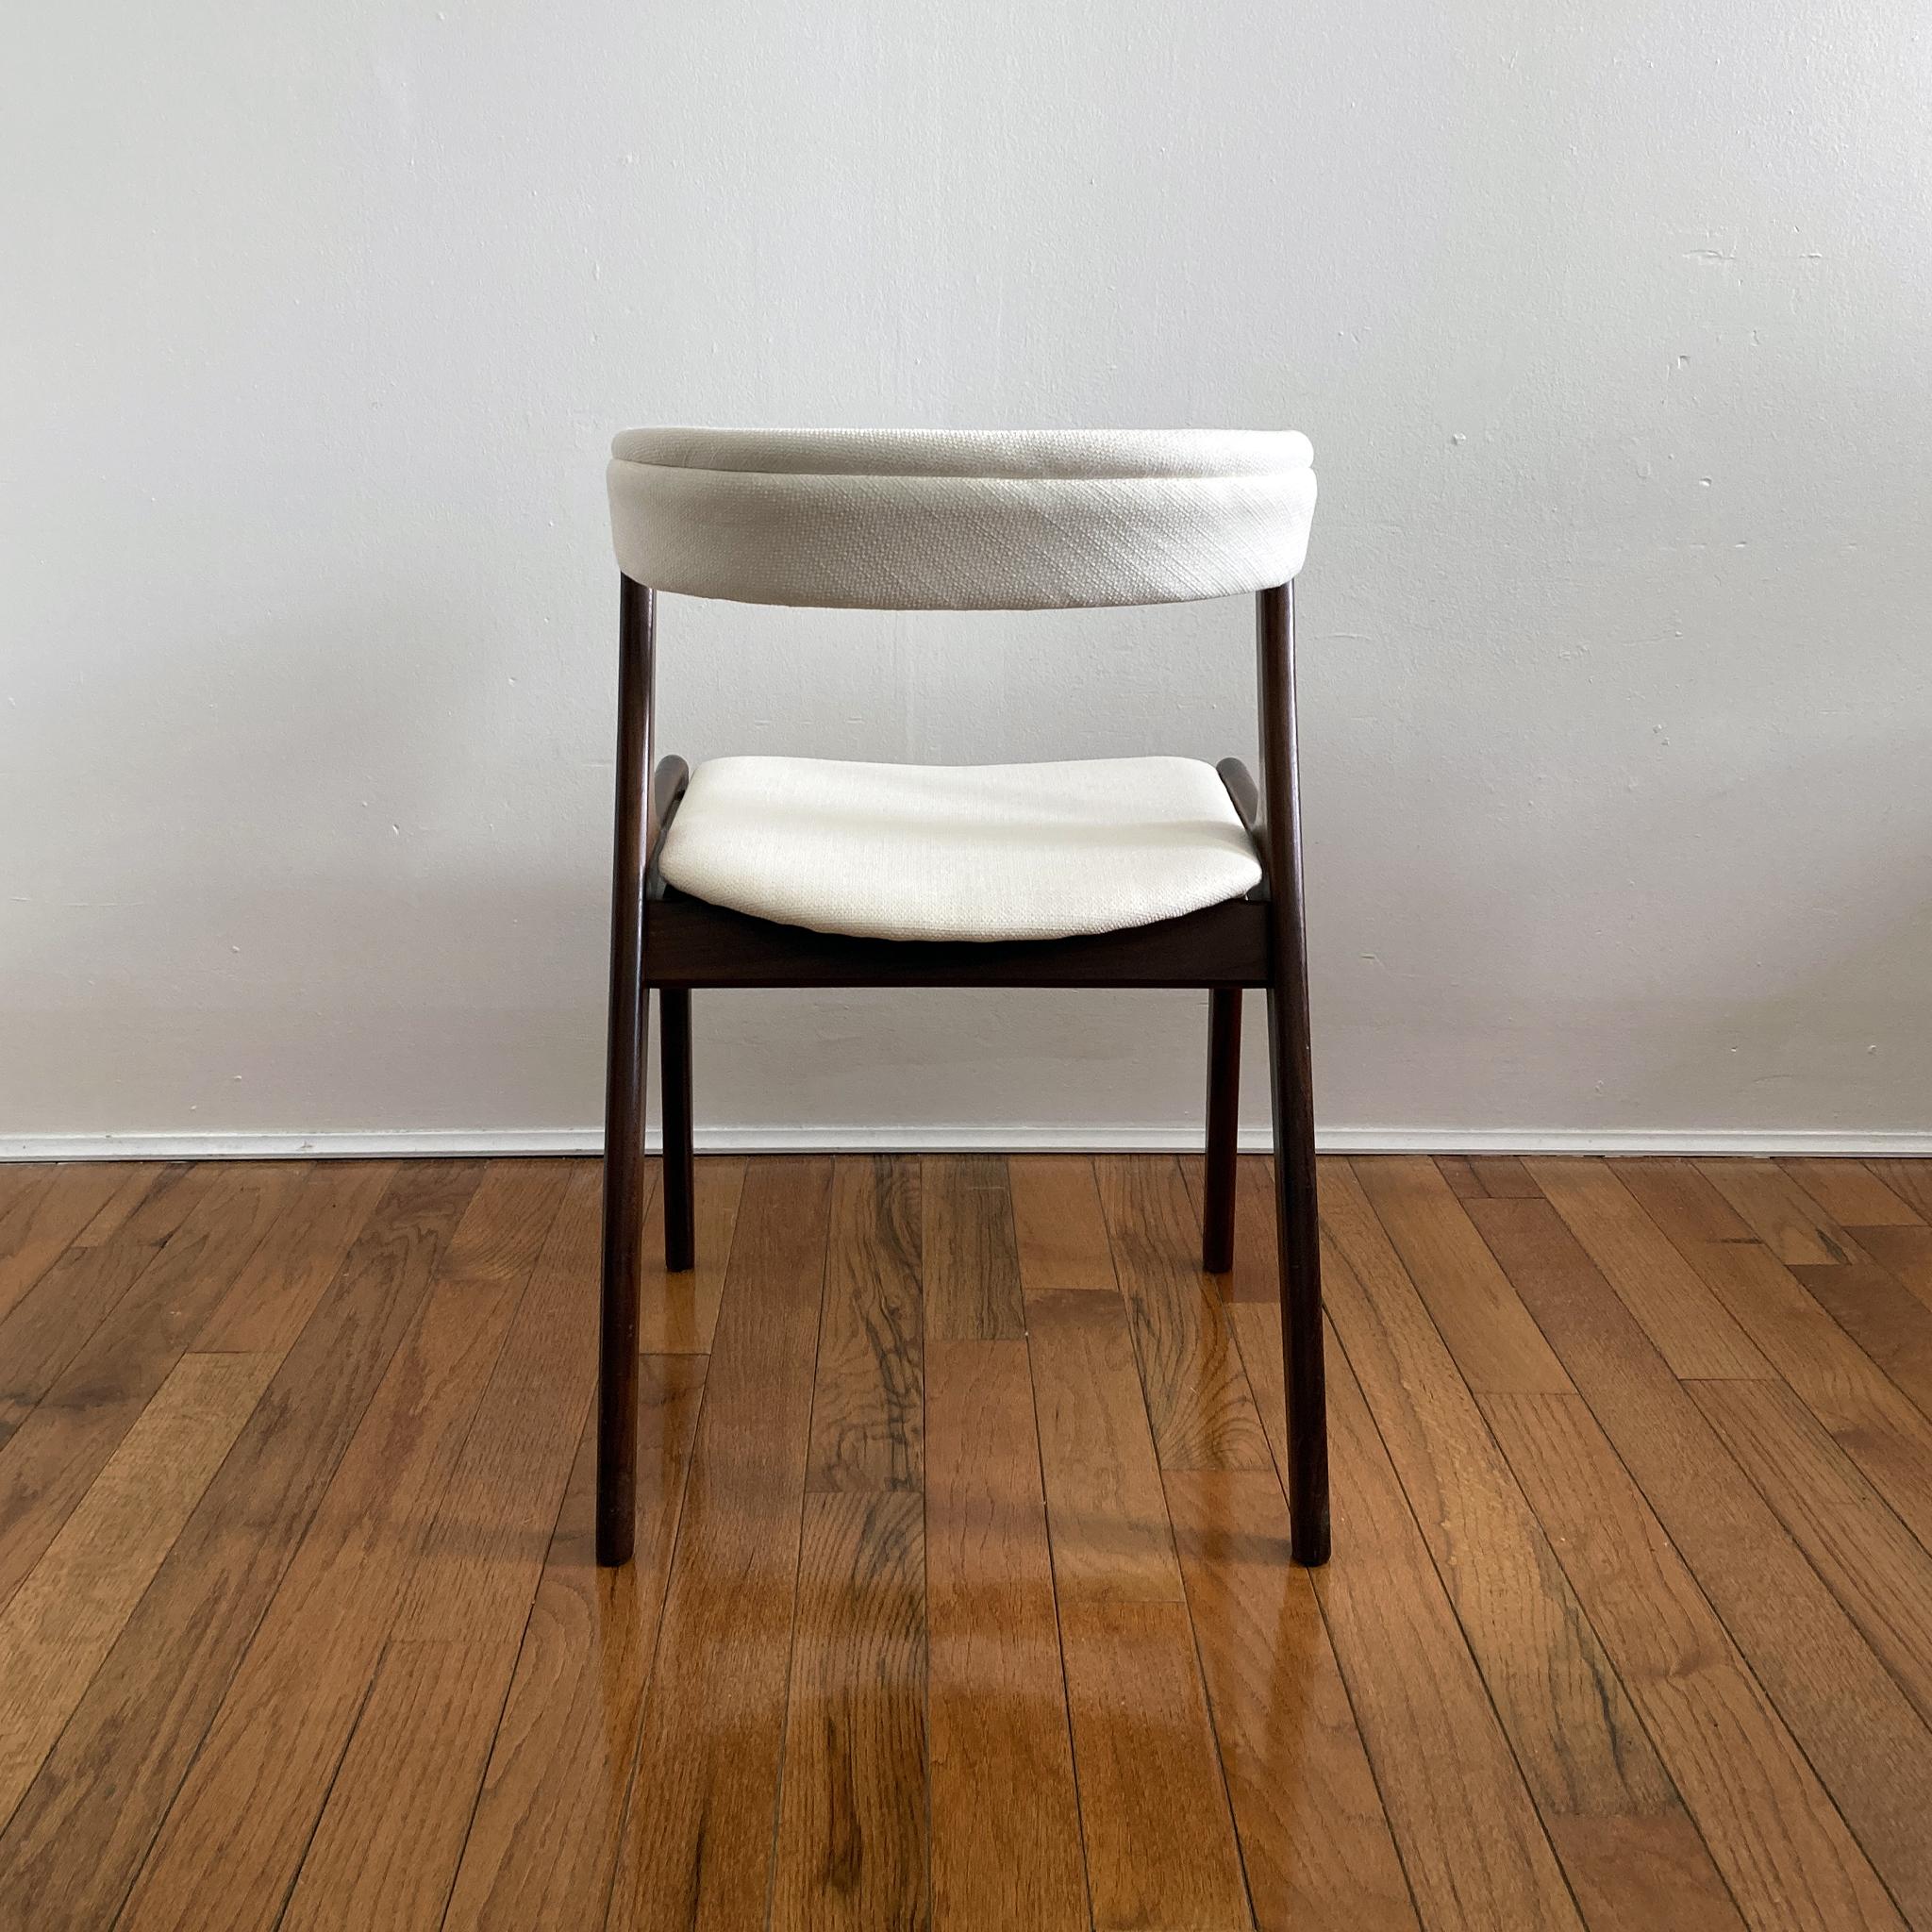 Fabric Kai Kristiansen Ivory Tweed Curved Back Teak Chairs, Danish, 1960s, Pair of Two For Sale